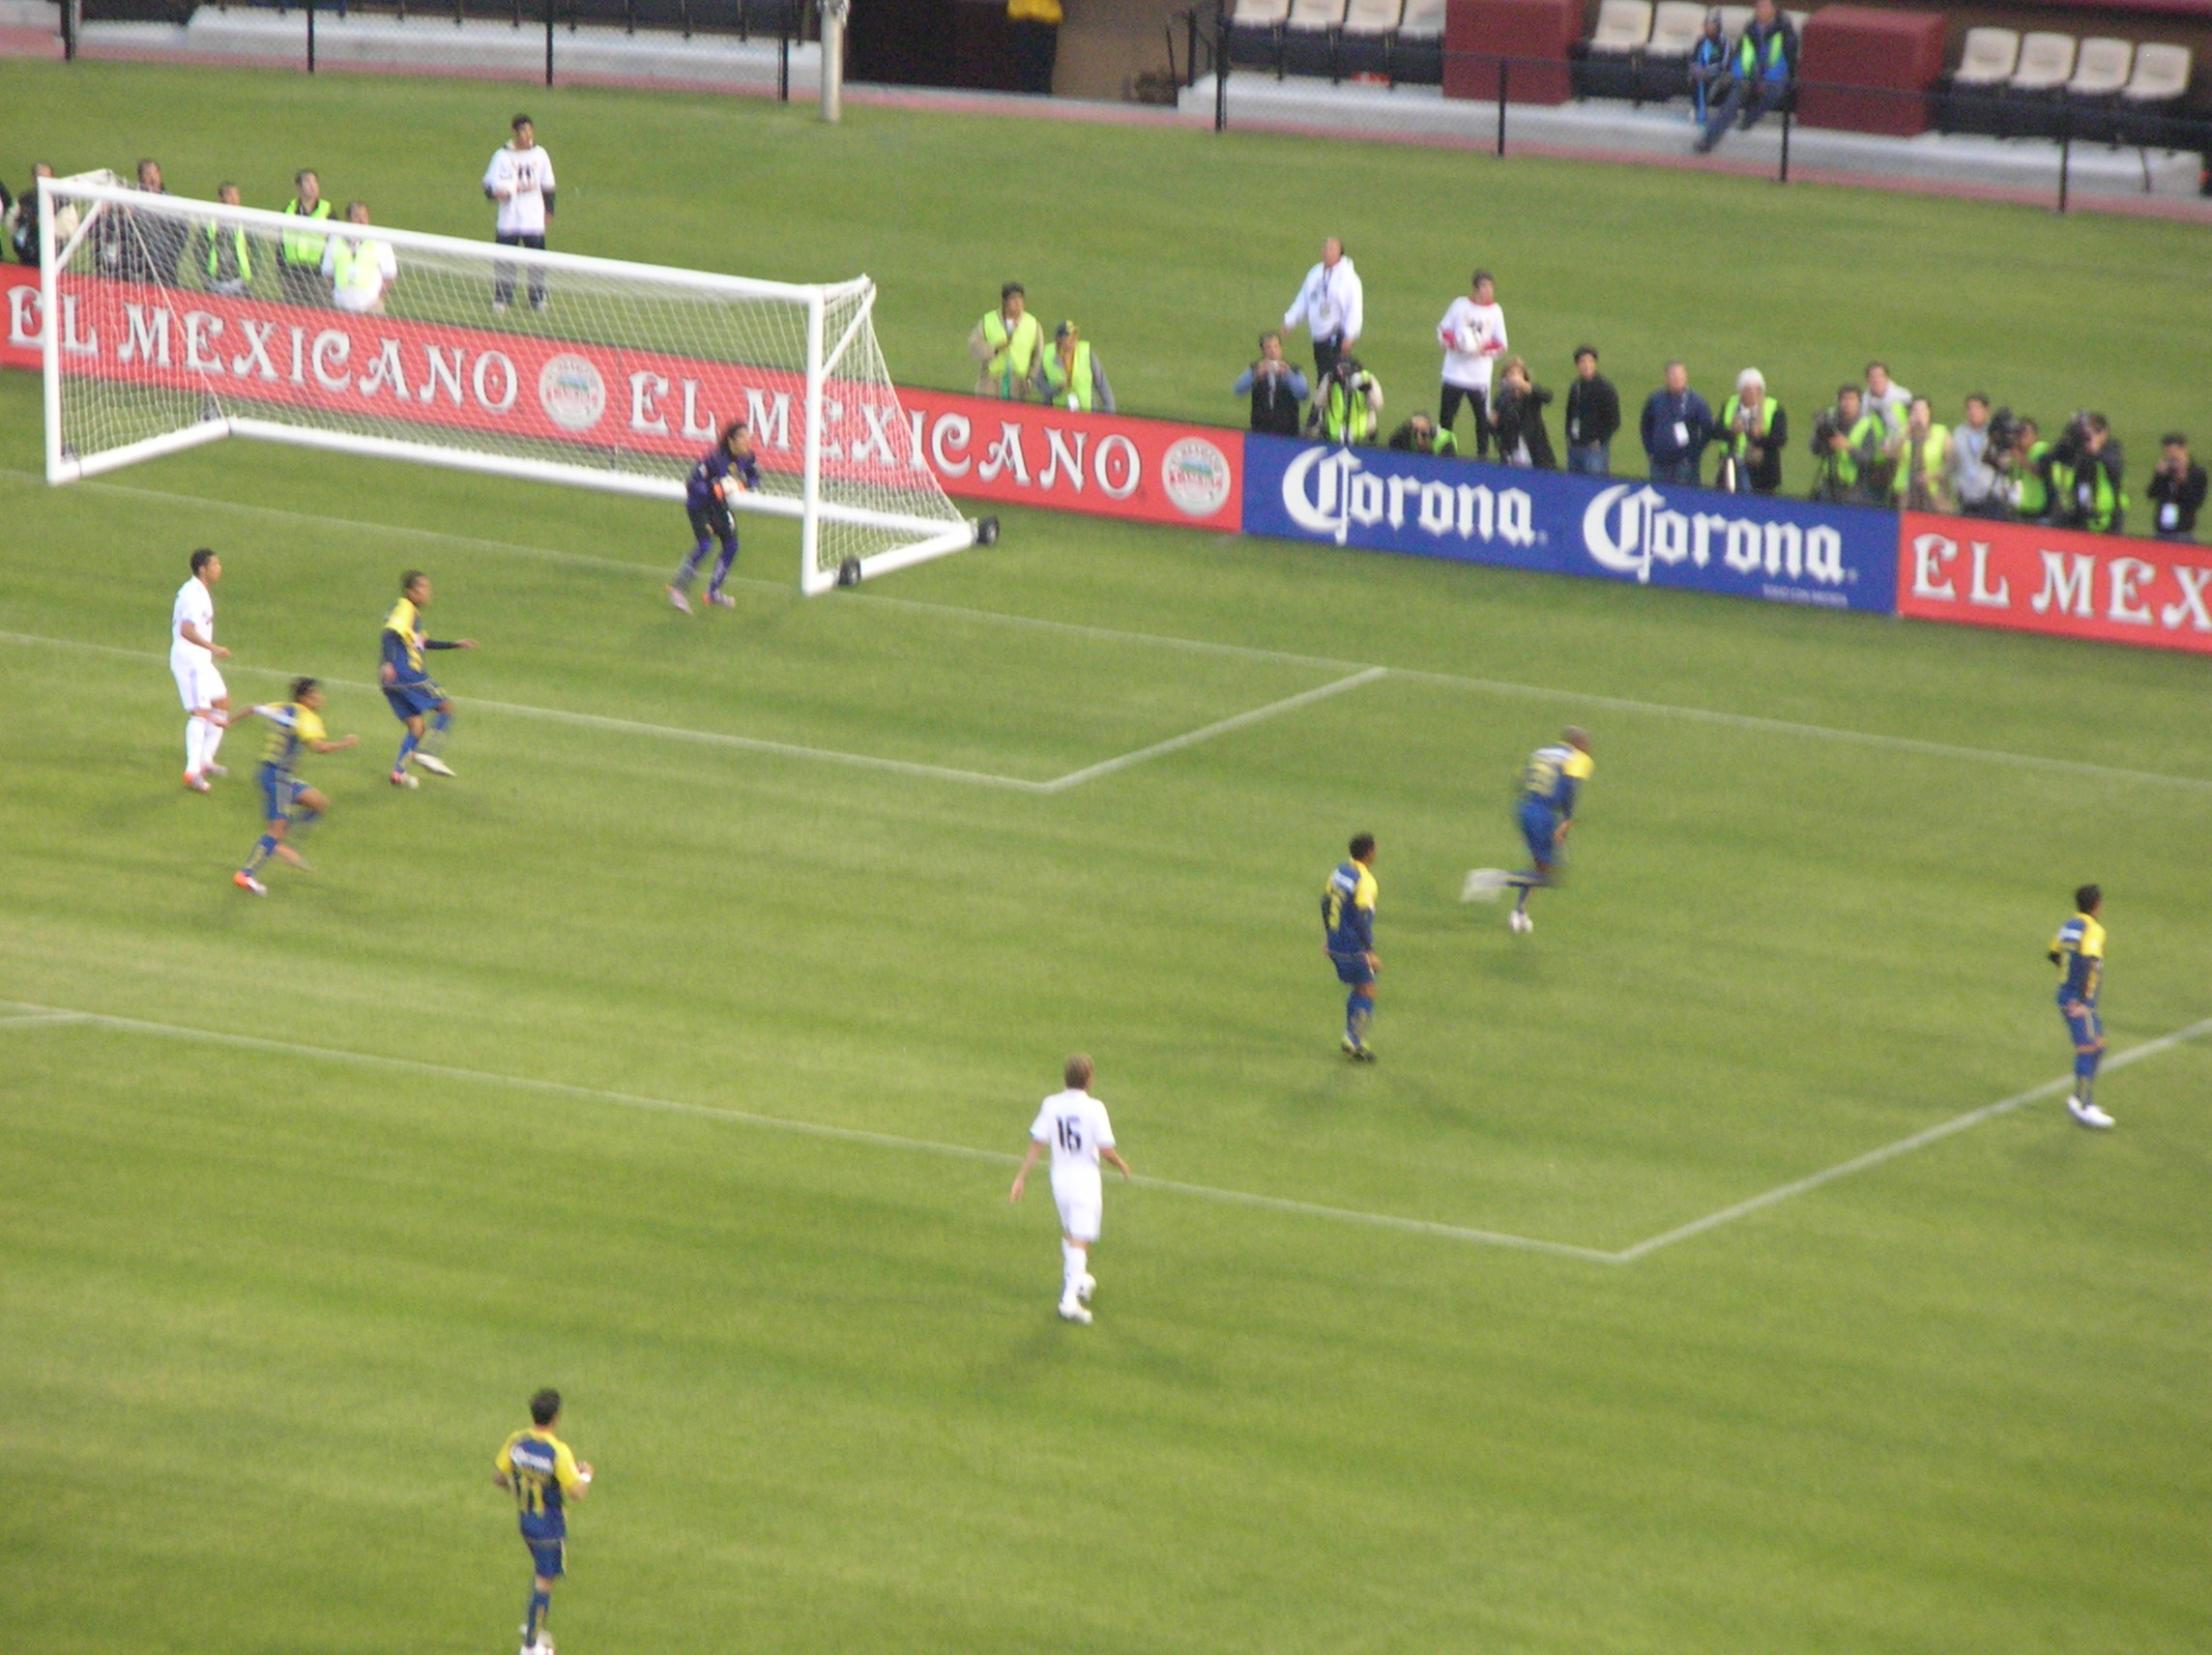 File:Club América & Real Madrid friendly match about to start 2010-08-04  1.JPG - Wikimedia Commons